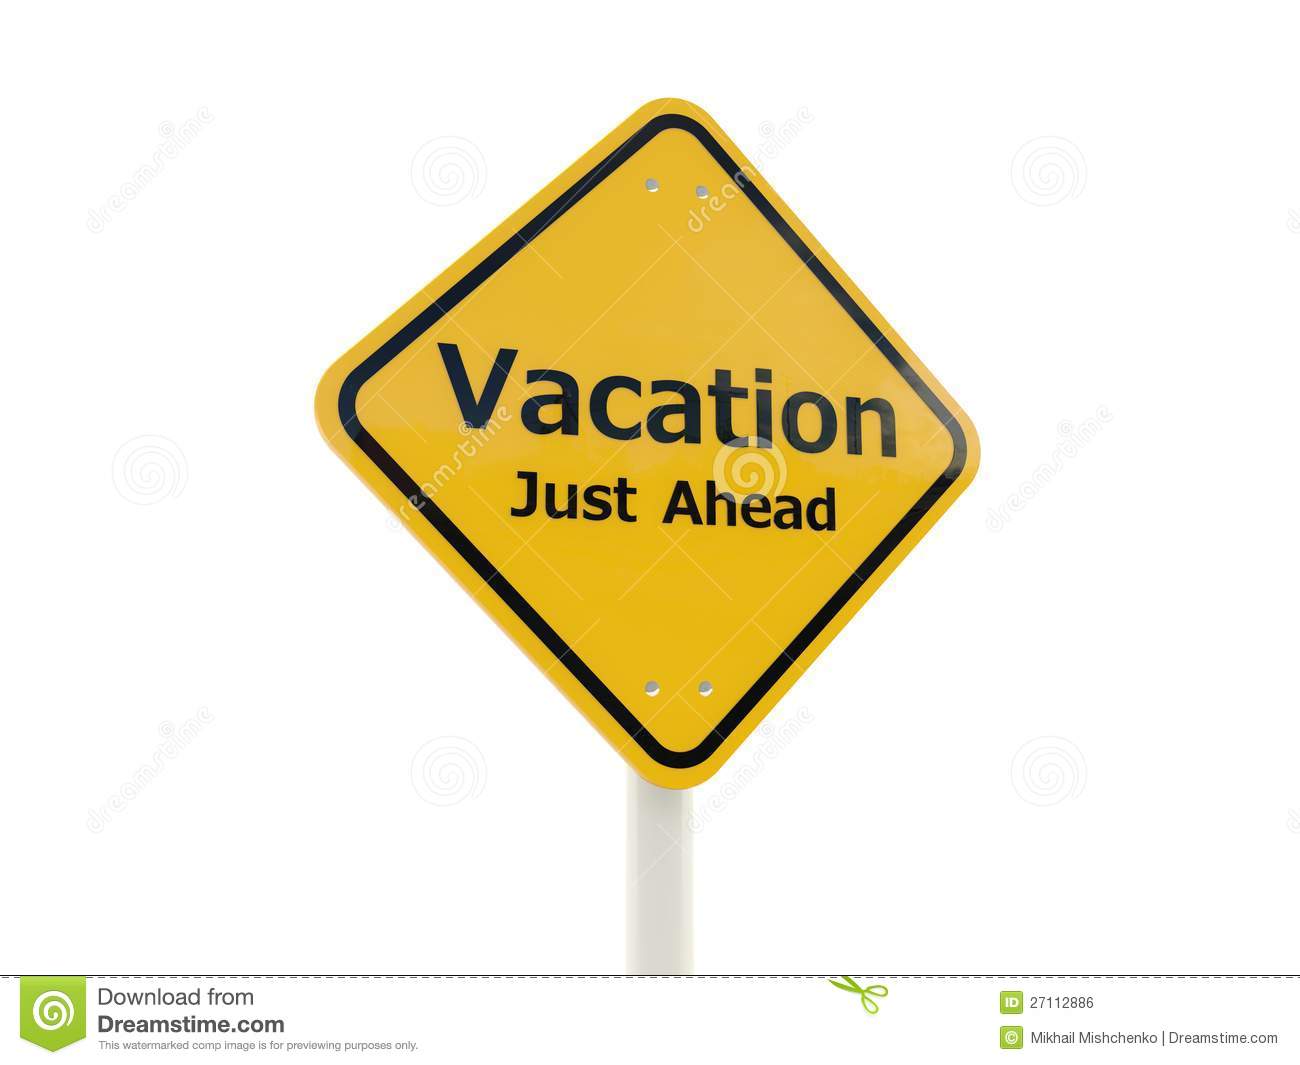 Vacation Just Ahead Road Sign Royalty Free Stock Image   Image